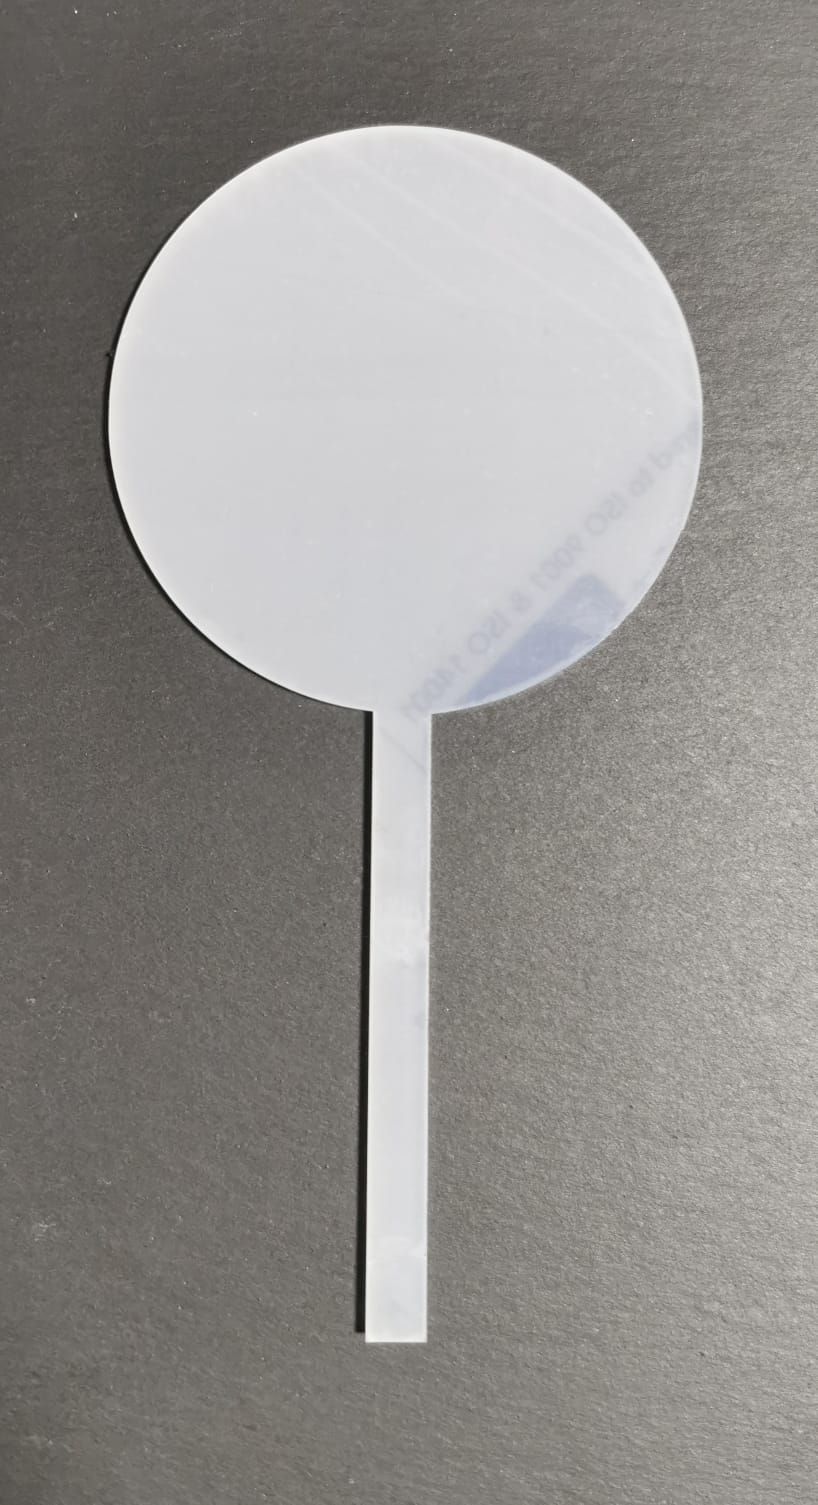 Blank Acrylic Cake Topper Round Paddle - Clear, White, Frosted, Black